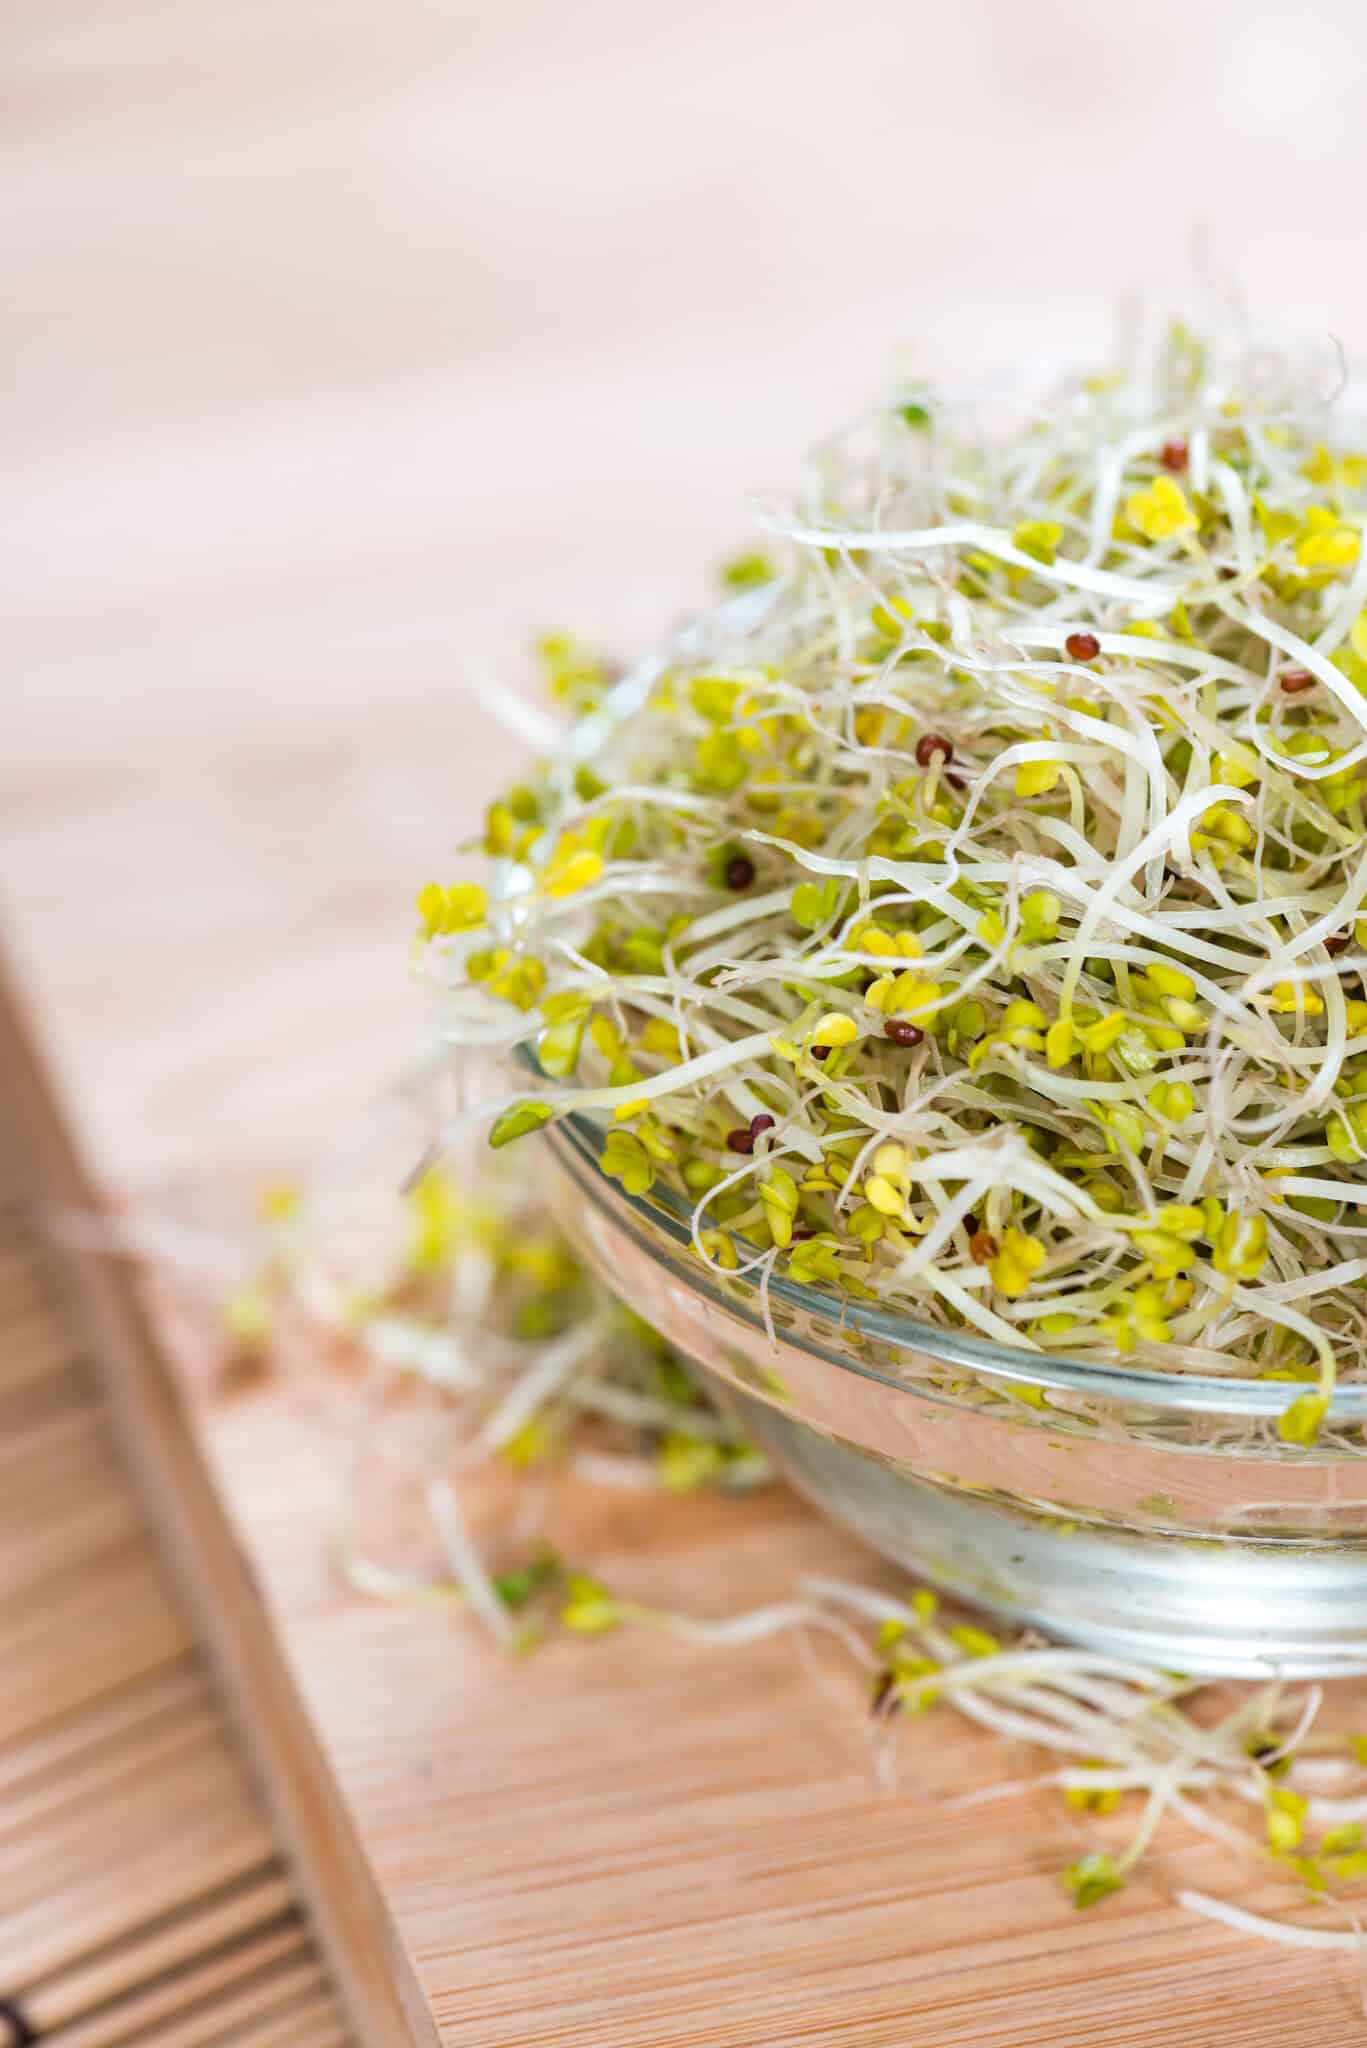 broccoli sprouts in bowl on wooden table ready to eat.